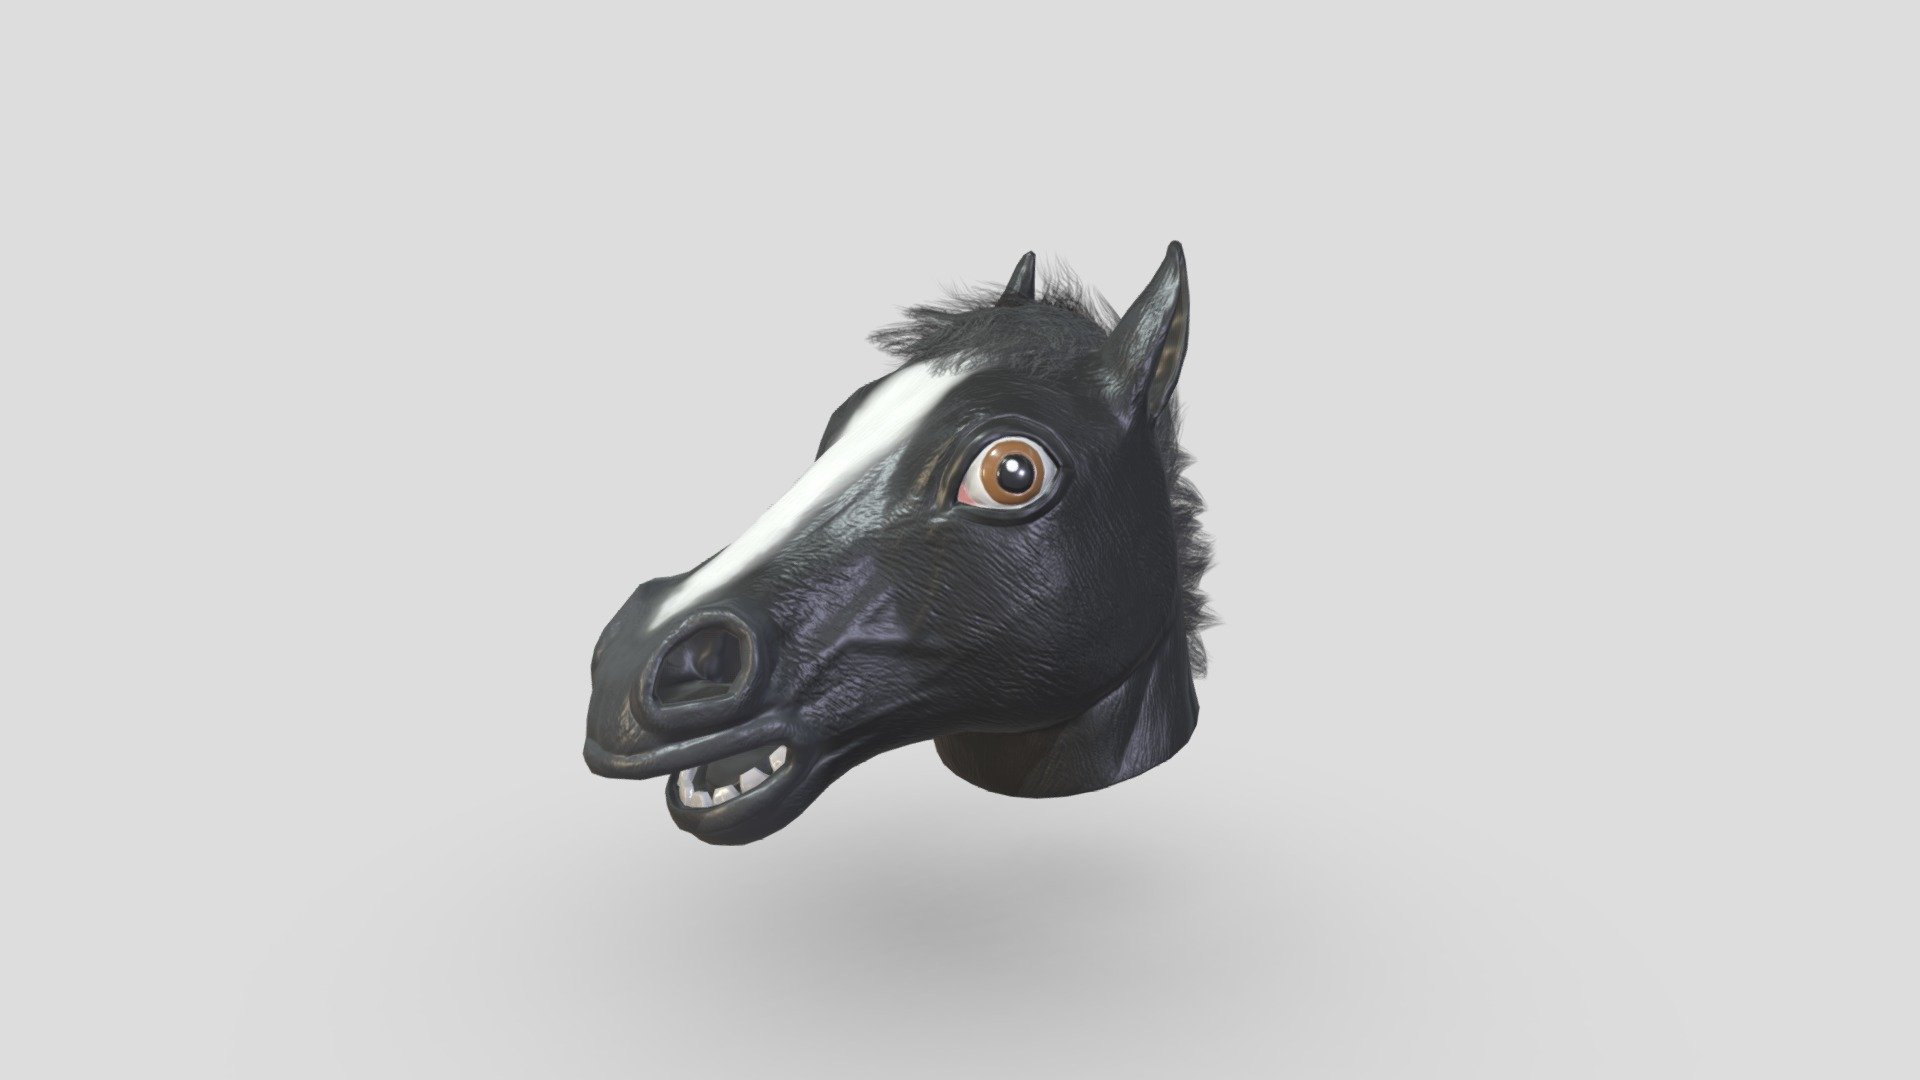 If you need additional work done do not hesitate to contact me, I am available for freelance work.

Funny Rubber Horse Head Mask in black for a character in disguise. 

Highpoly sculpted in Nomadsculpt. Lowpoly made in Blender. Model and Concept by Me, Enya Gerber 3d model